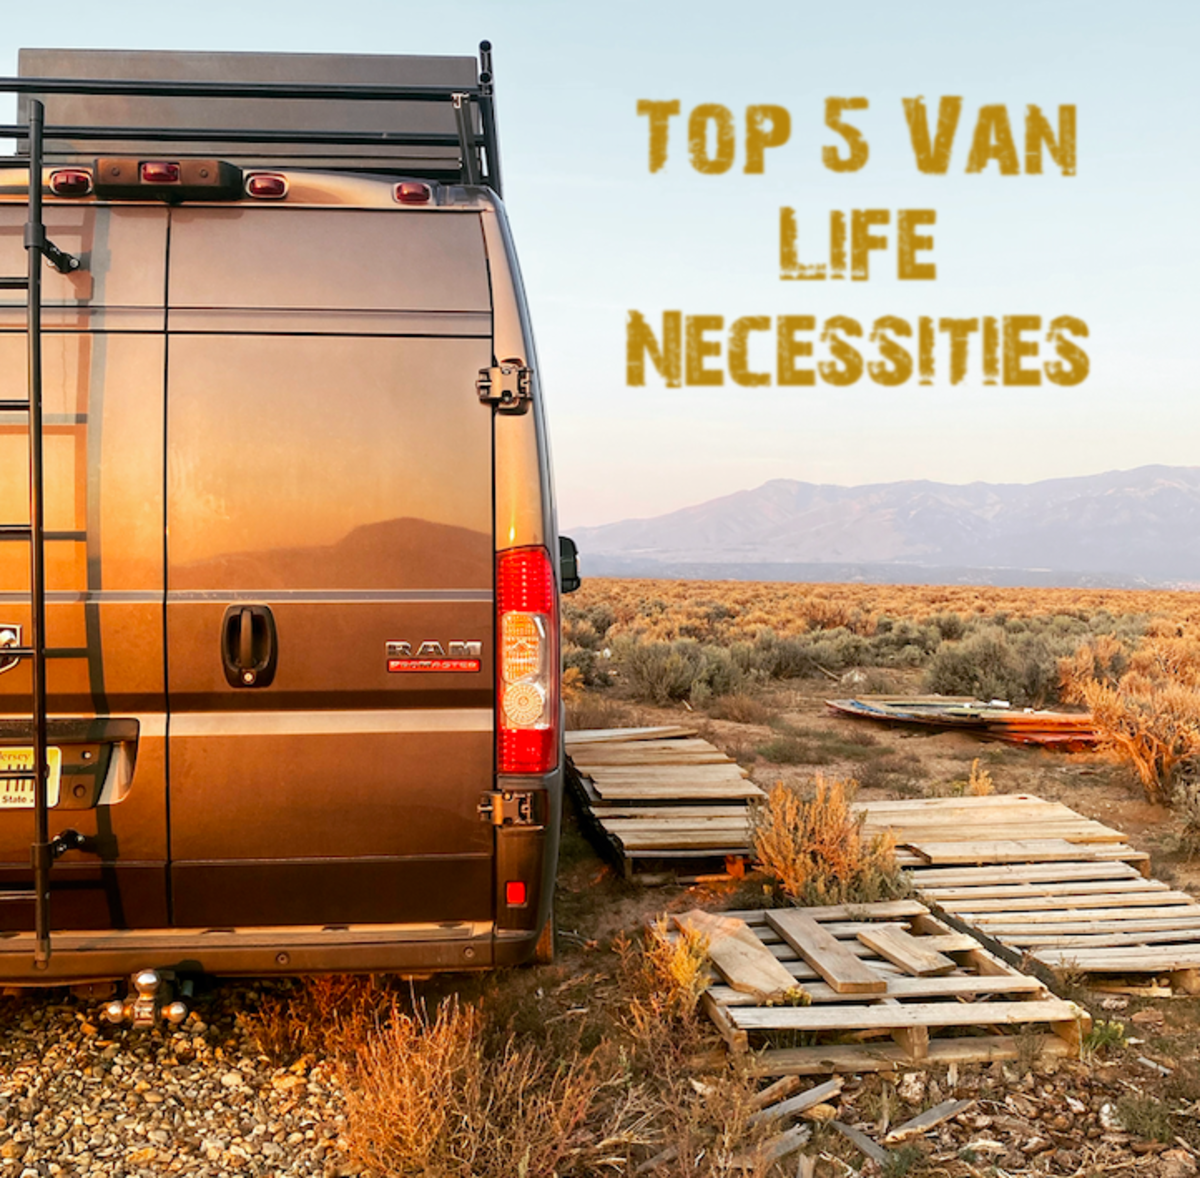 Off grid van life is amazing, provided you have the right necessities.